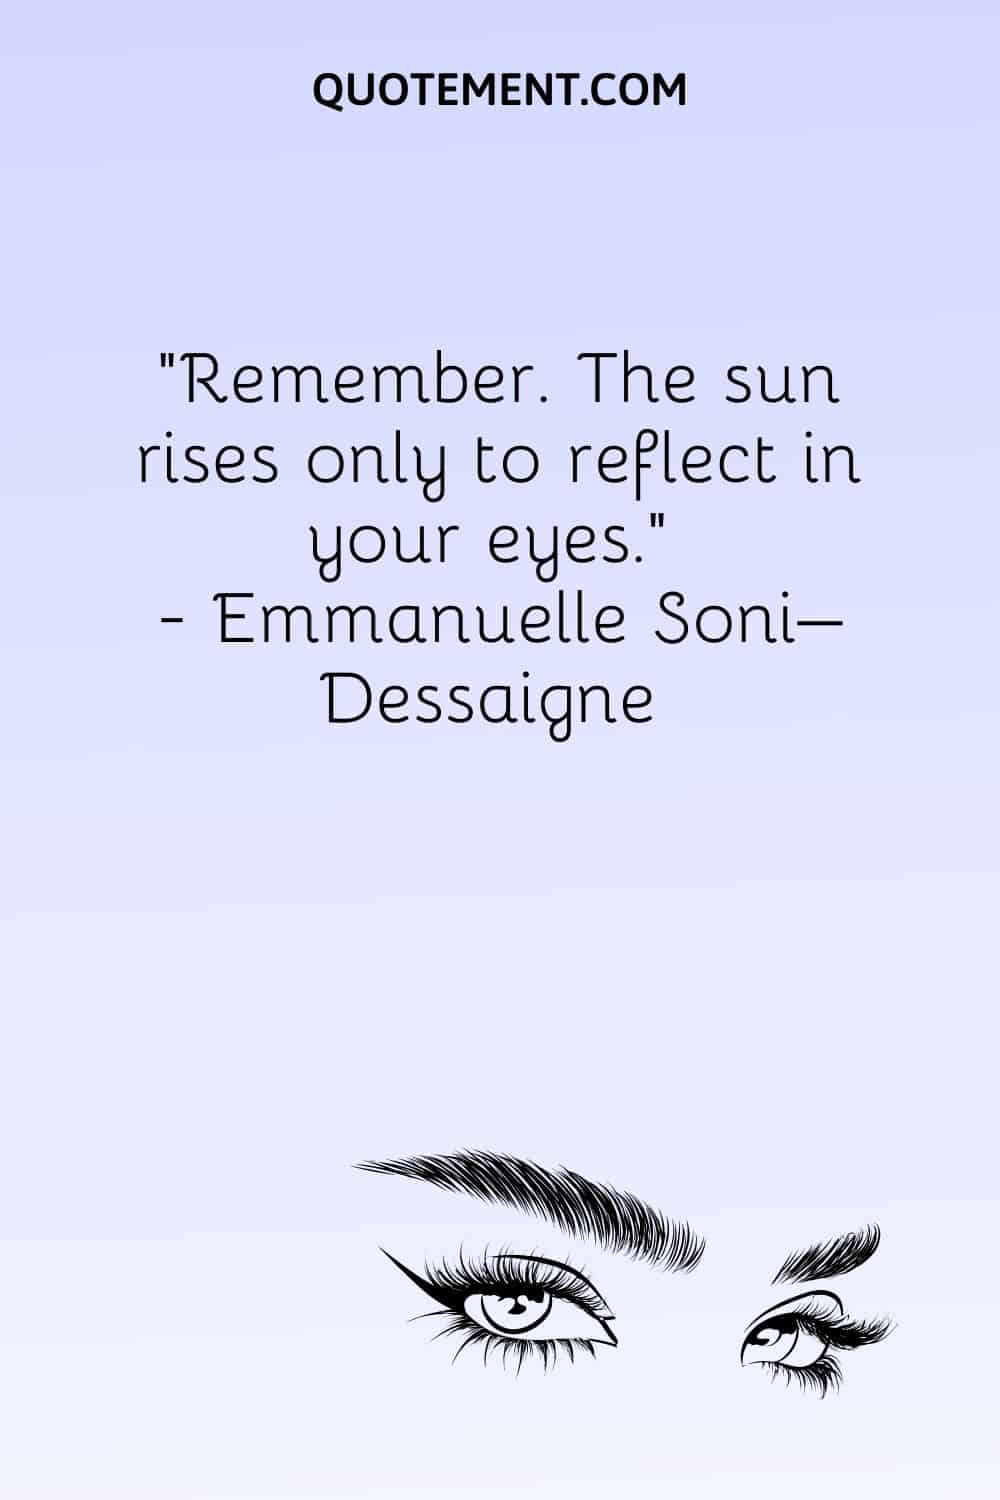 Remember. The sun rises only to reflect in your eyes